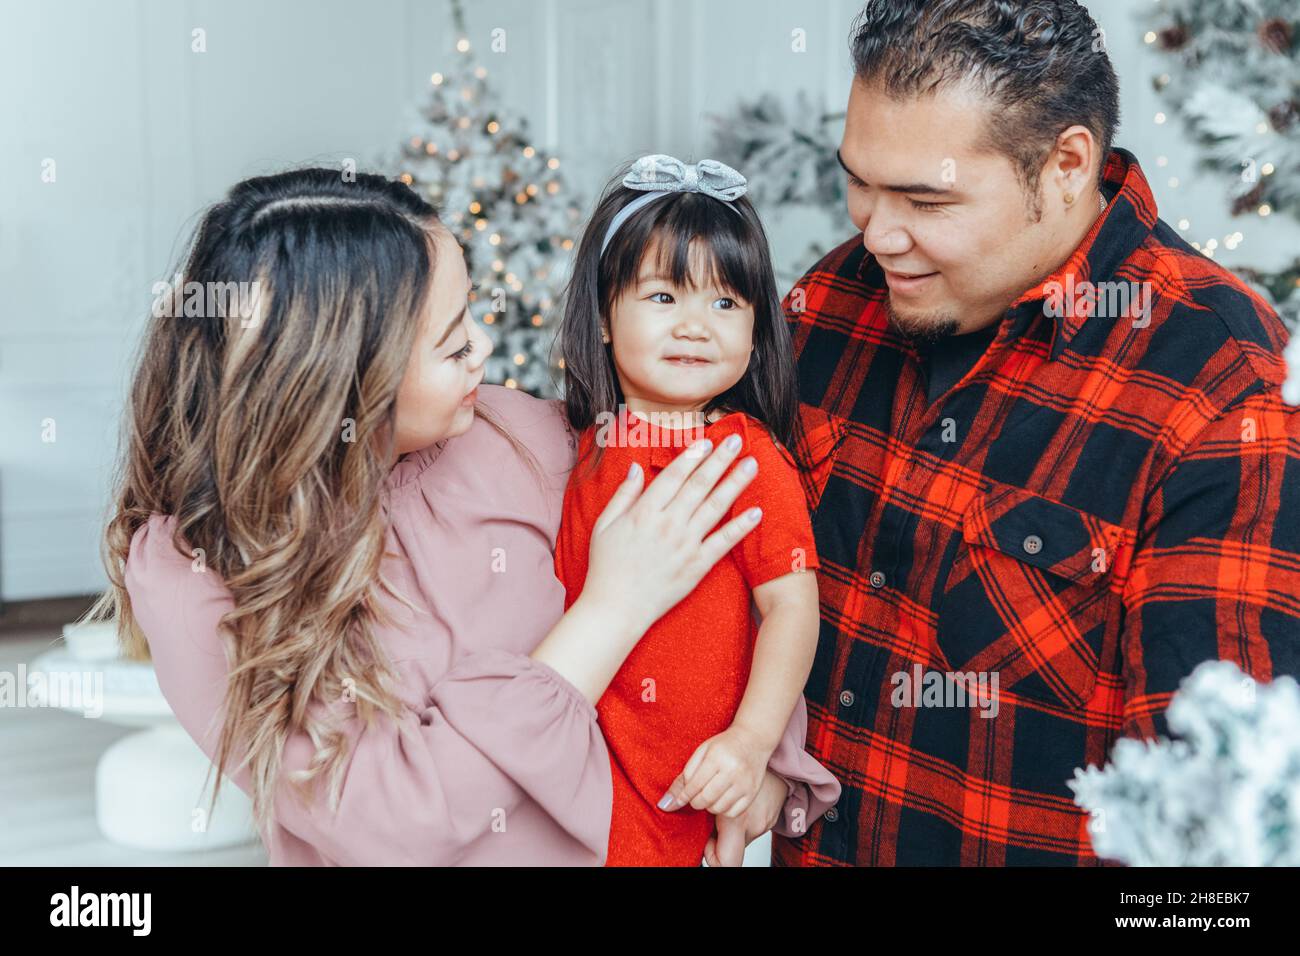 Asian family father, mother with daughter toddler girl celebrating Christmas or New Year. Mixed race mom, dad, daughter decorating Christas tree huggi Stock Photo